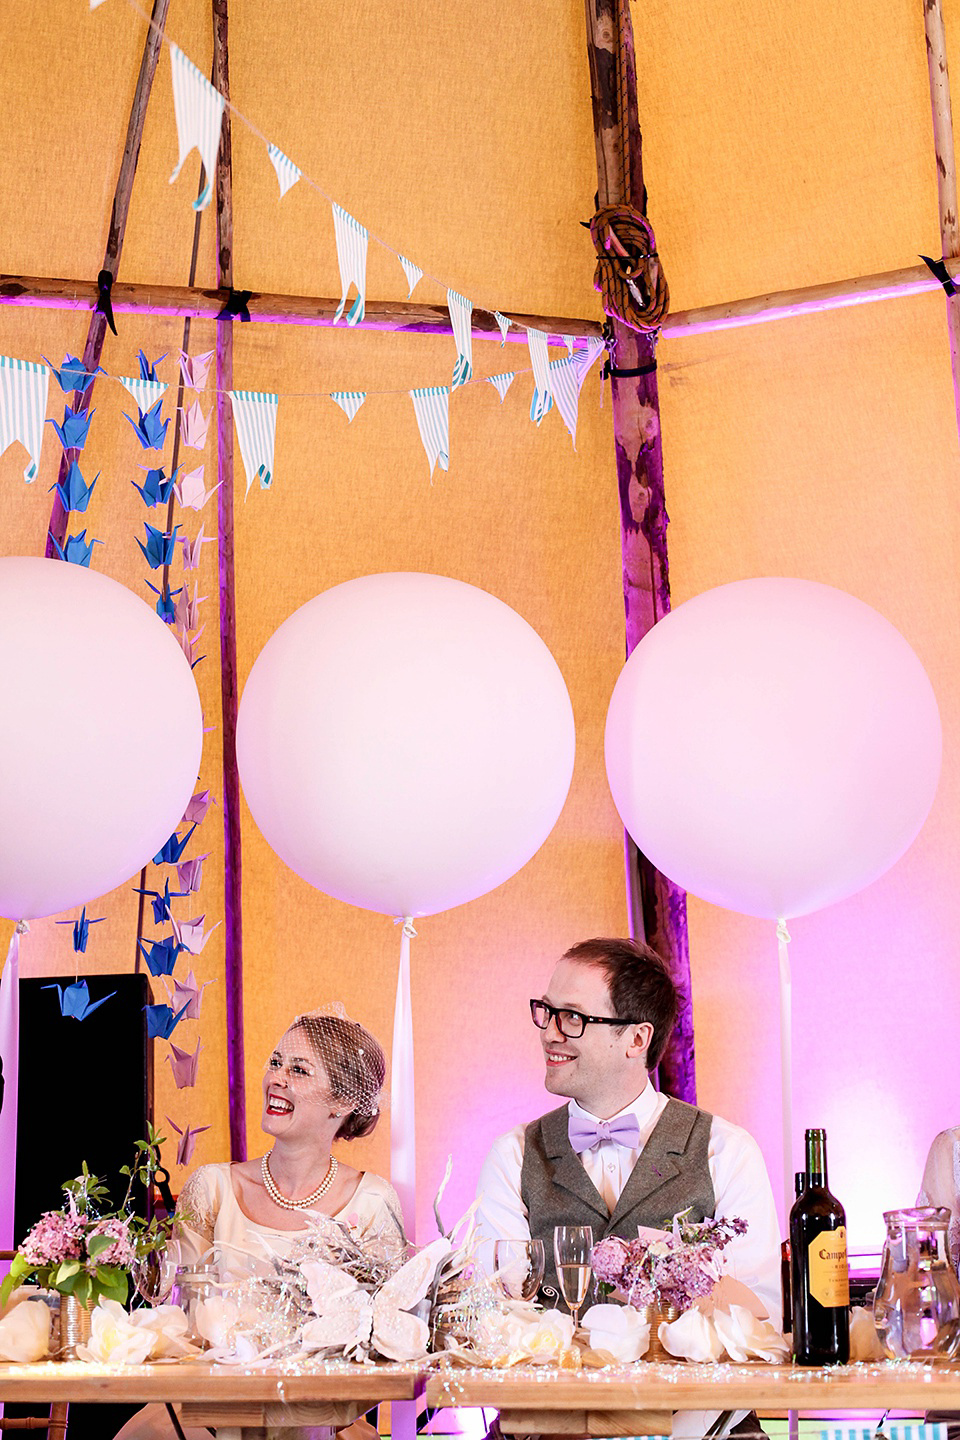 Vintage 1950s Inspired Humanist Beach Wedding in Scotland. Images by Icon Photography Studios.